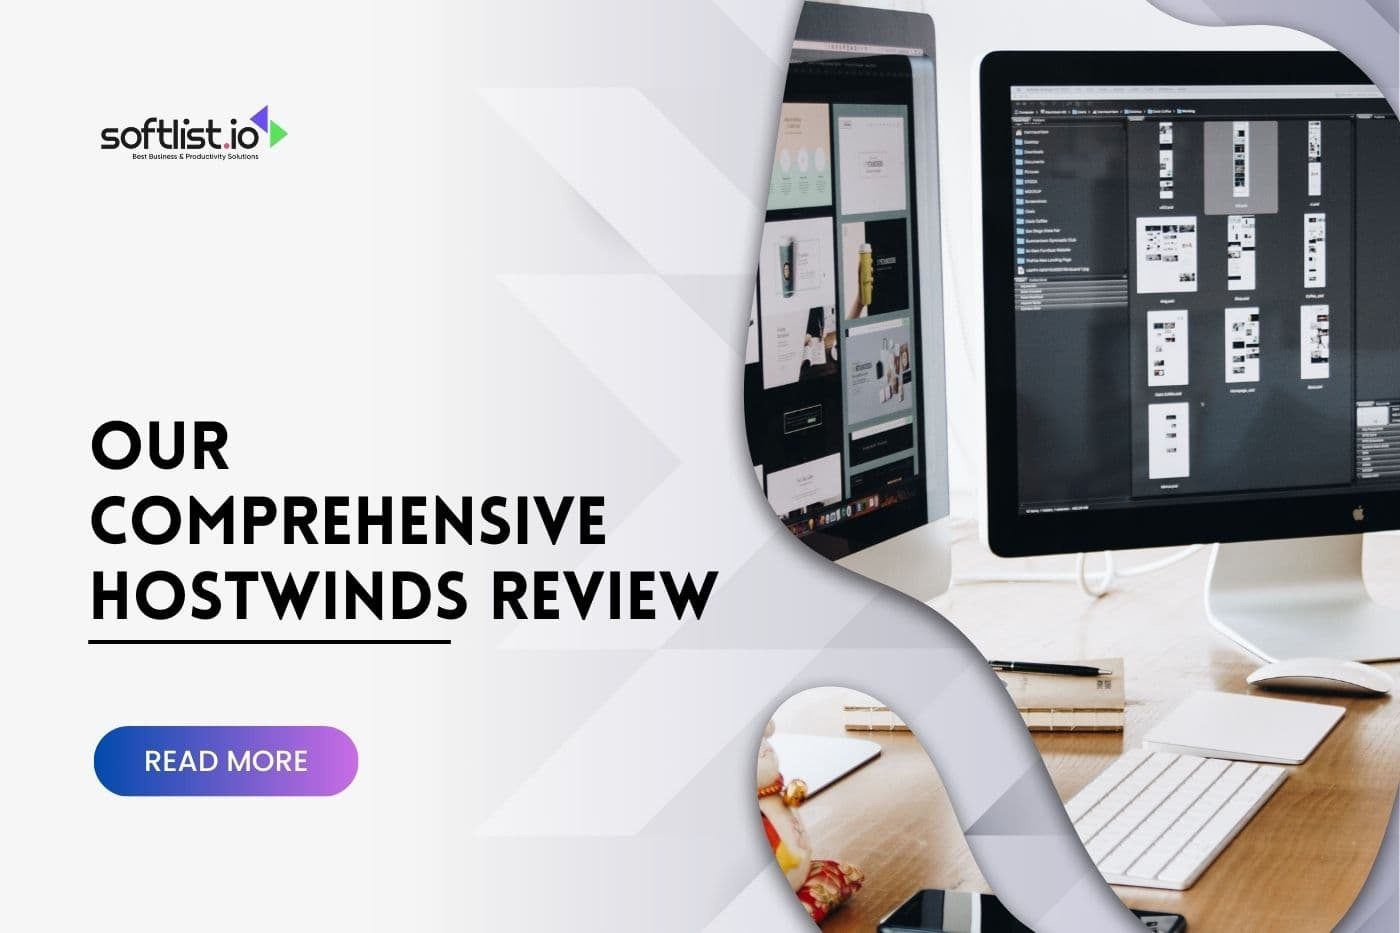 Our Comprehensive Hostwinds Review